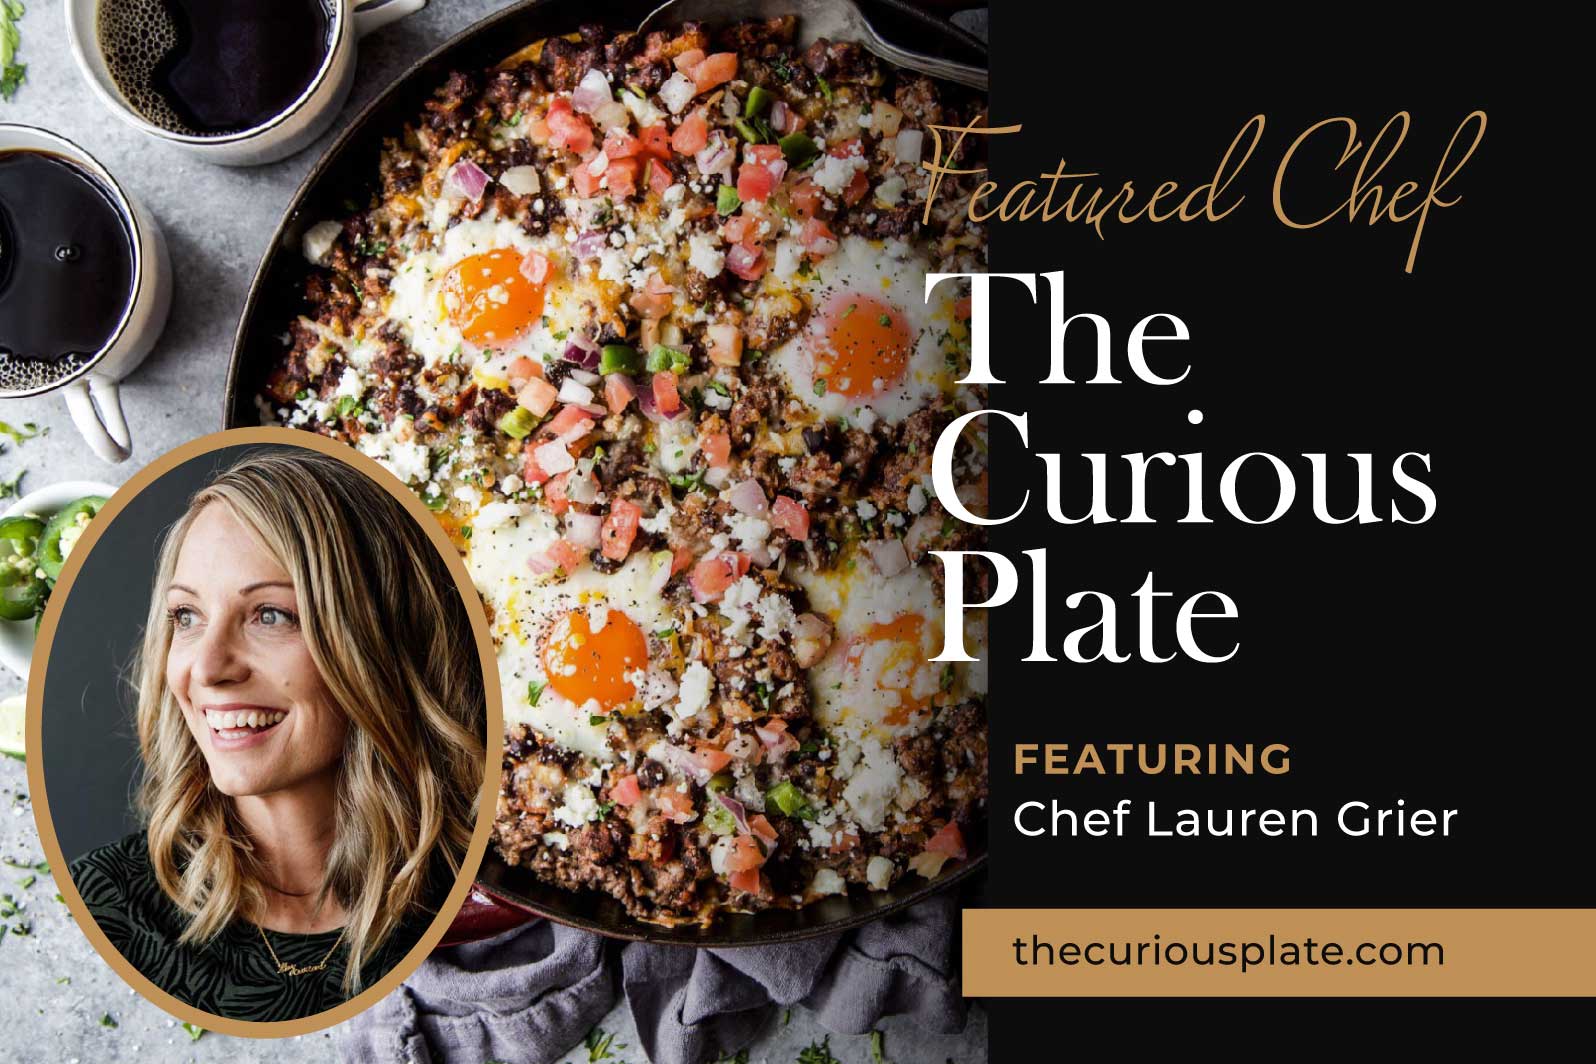 Chef Lauren Grier from The Curious Plate